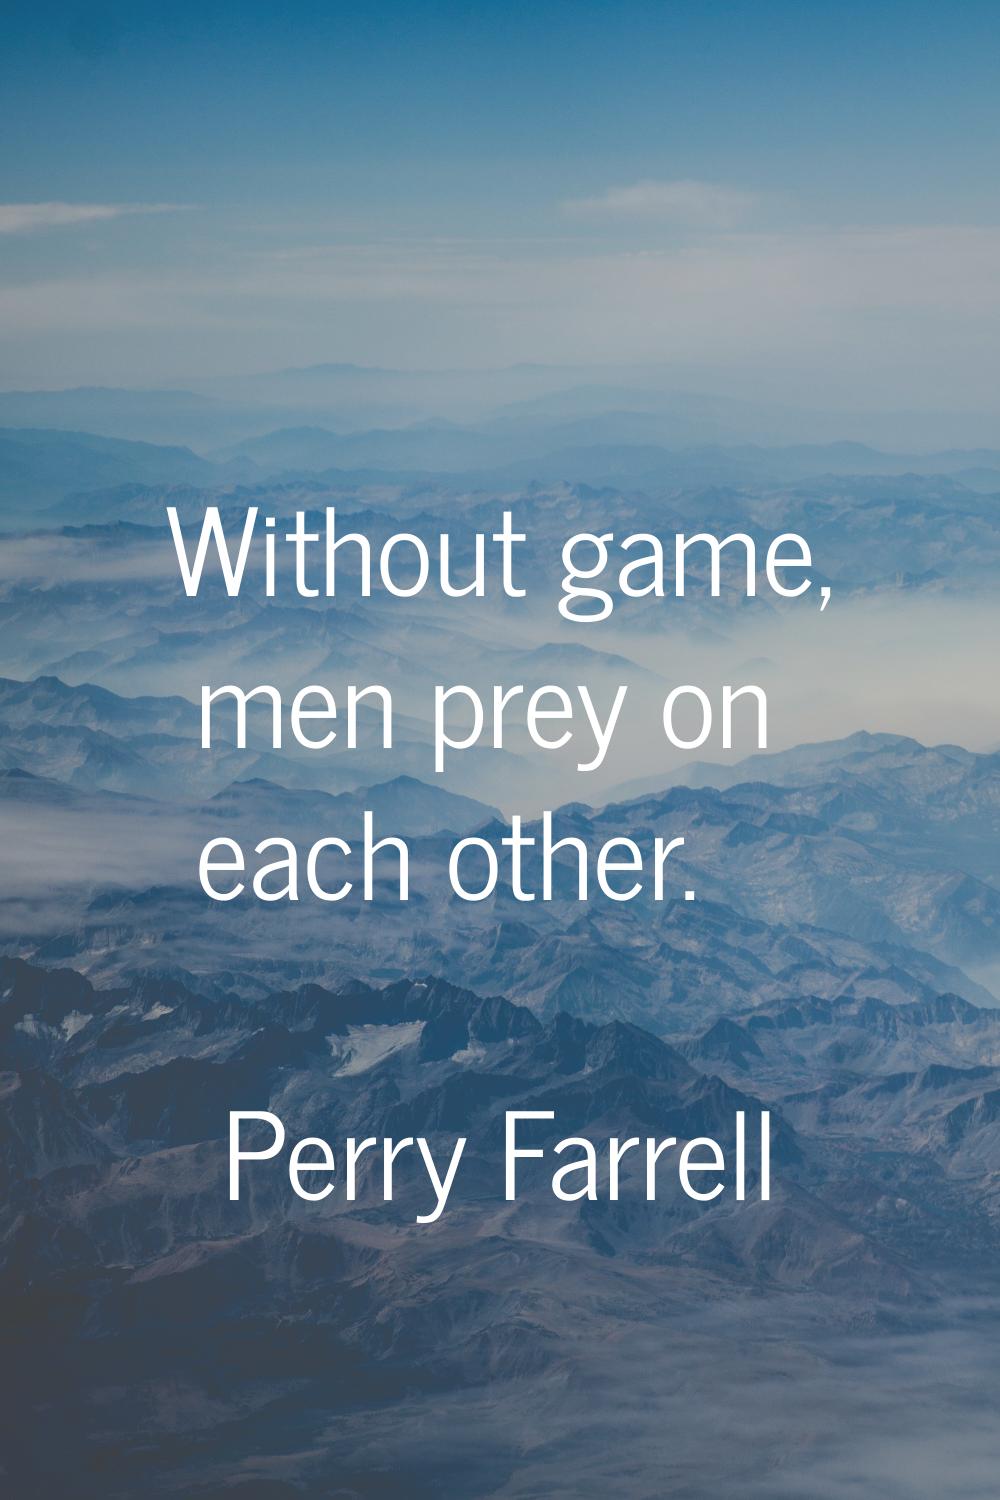 Without game, men prey on each other.